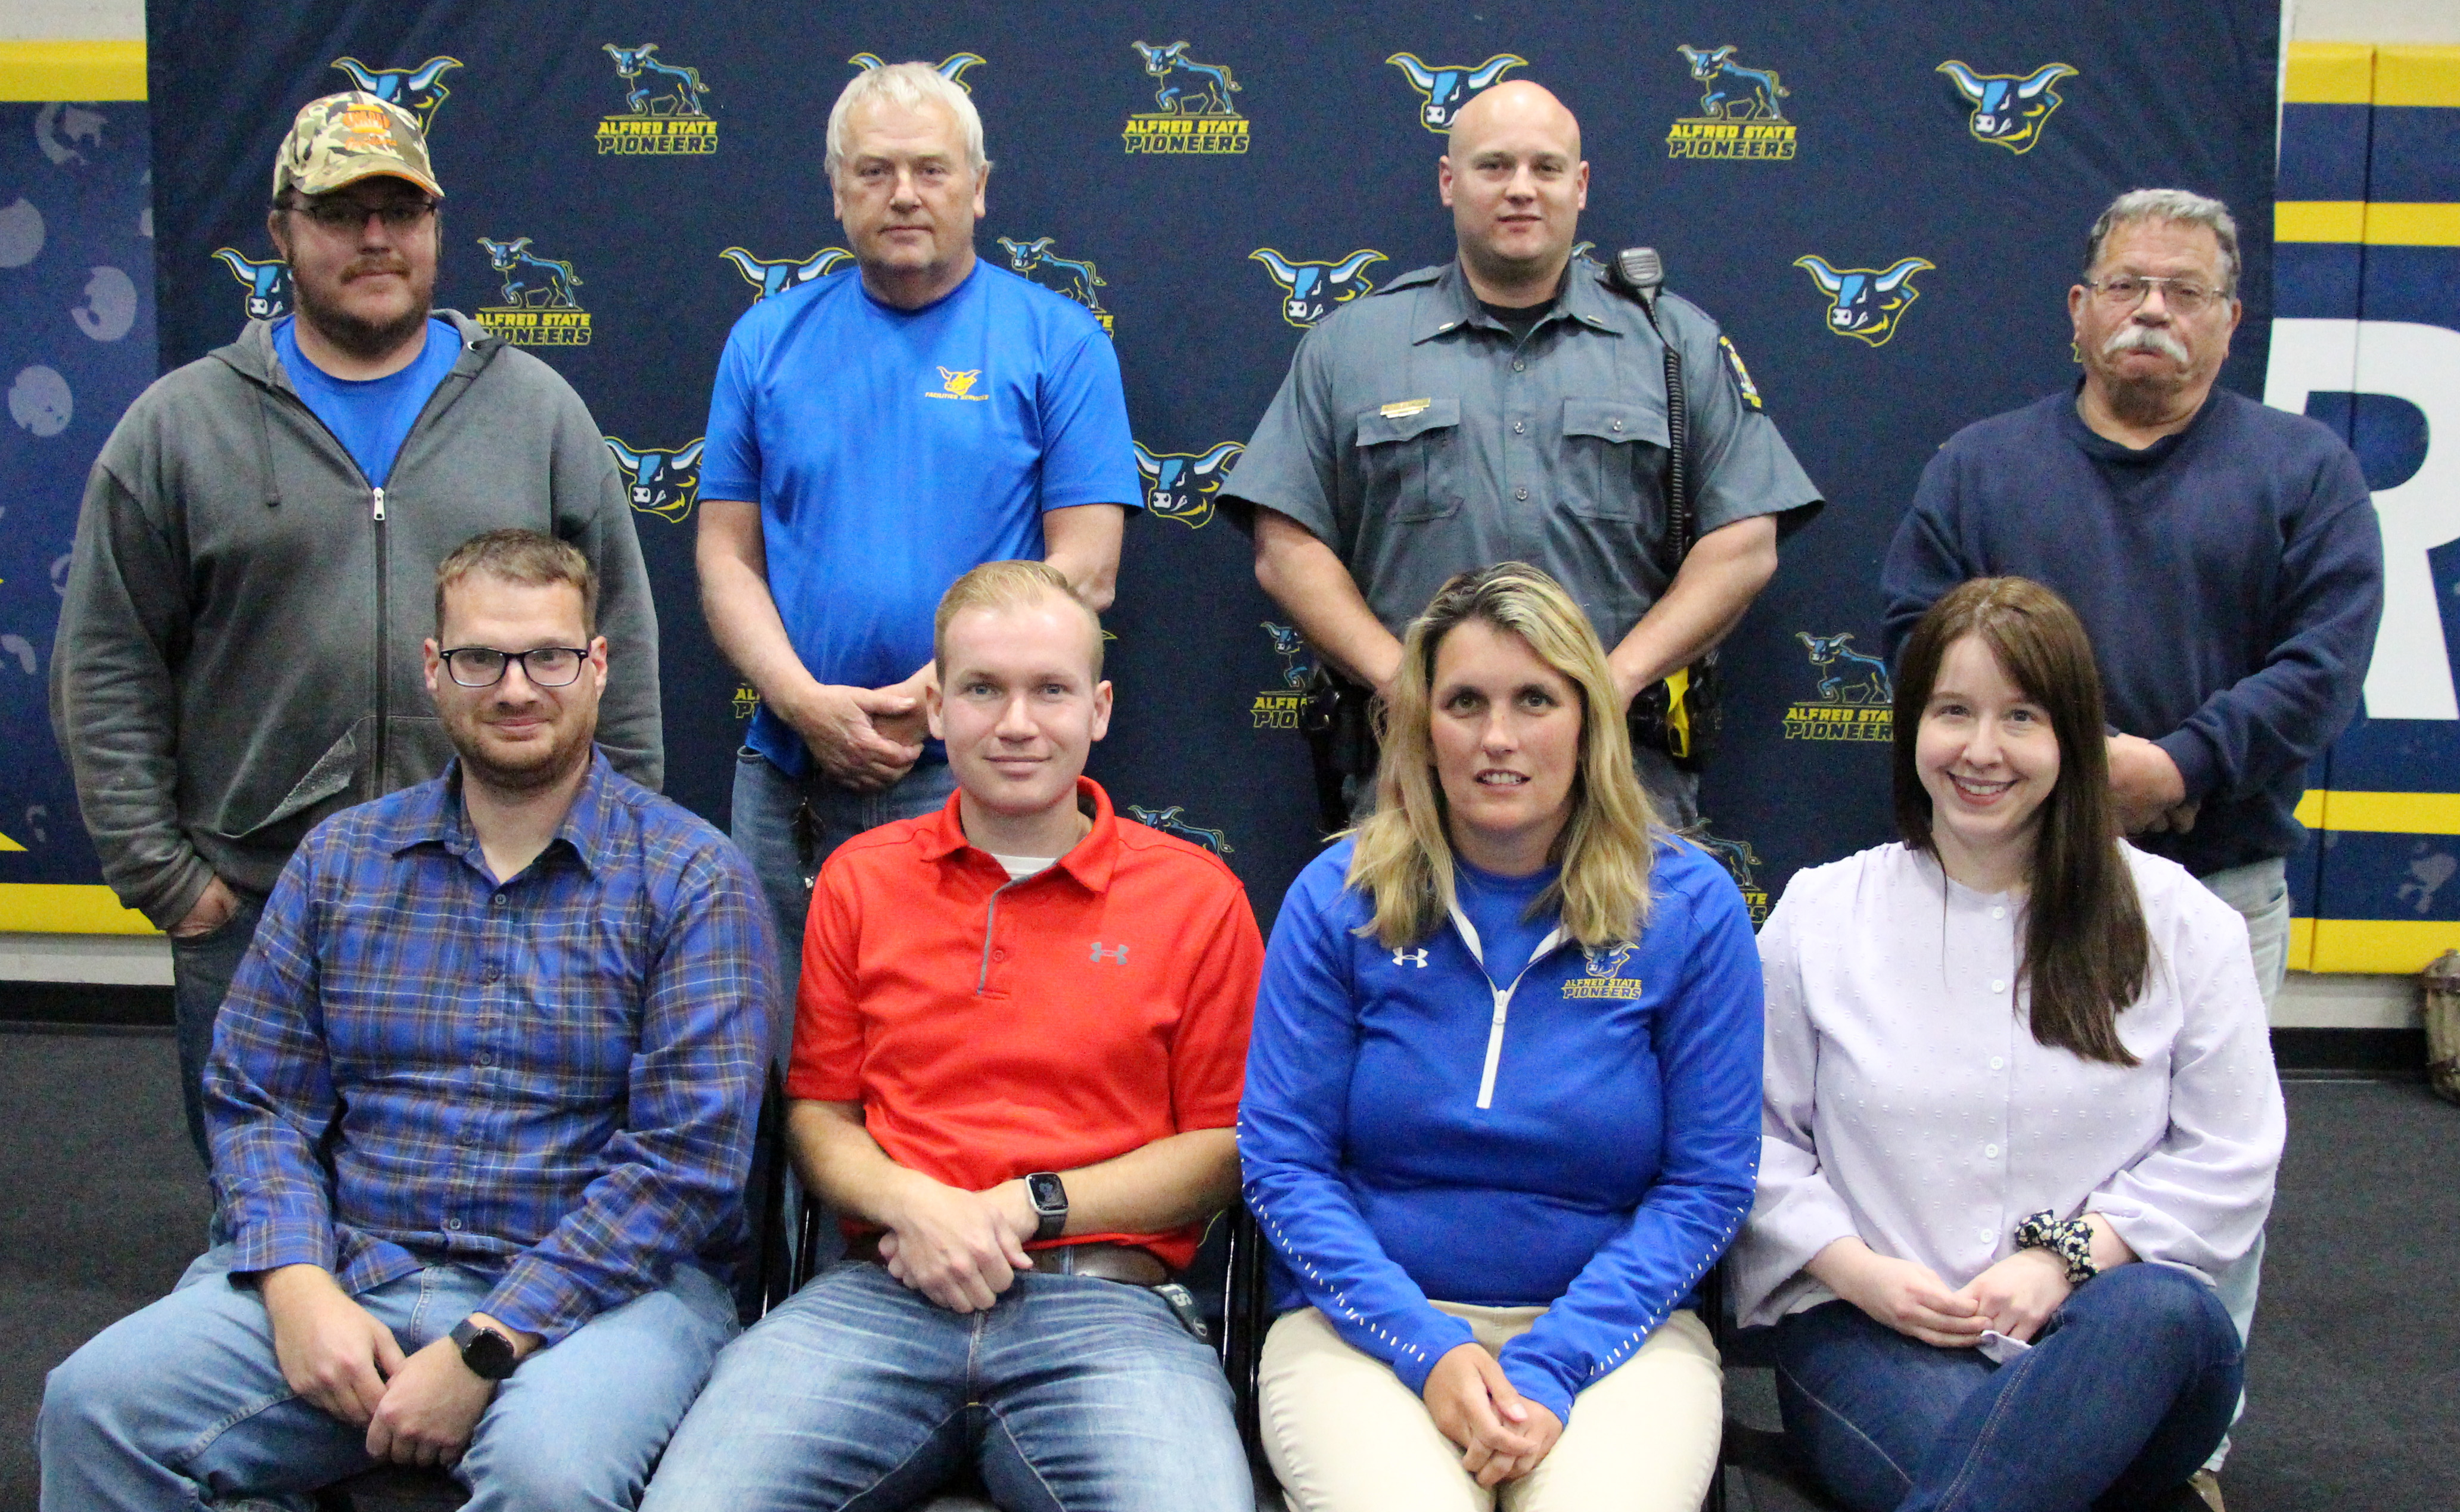 Employees recognized for 10 years of service